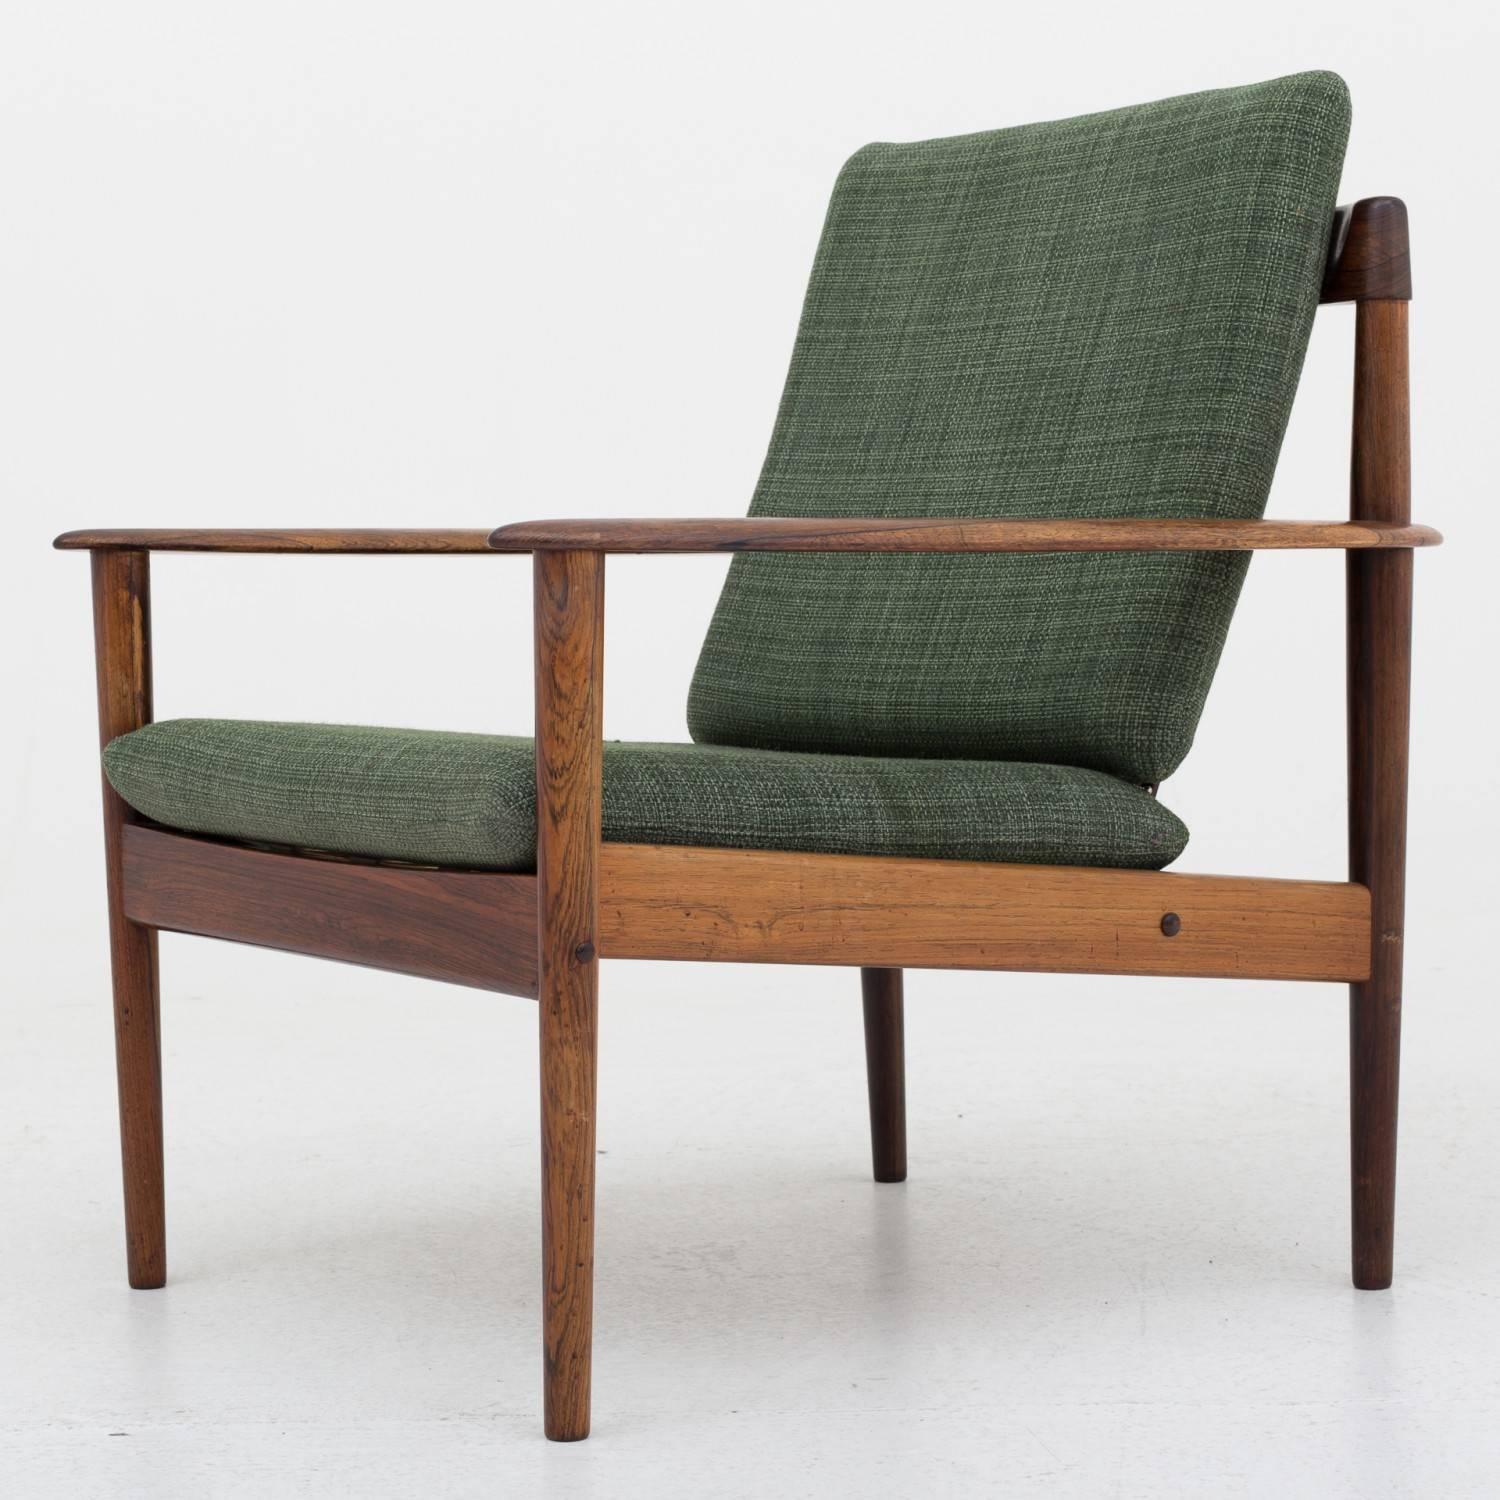 Two armchairs by Grete Jalk in rosewood with green cushions. Maker P. Jeppesen.